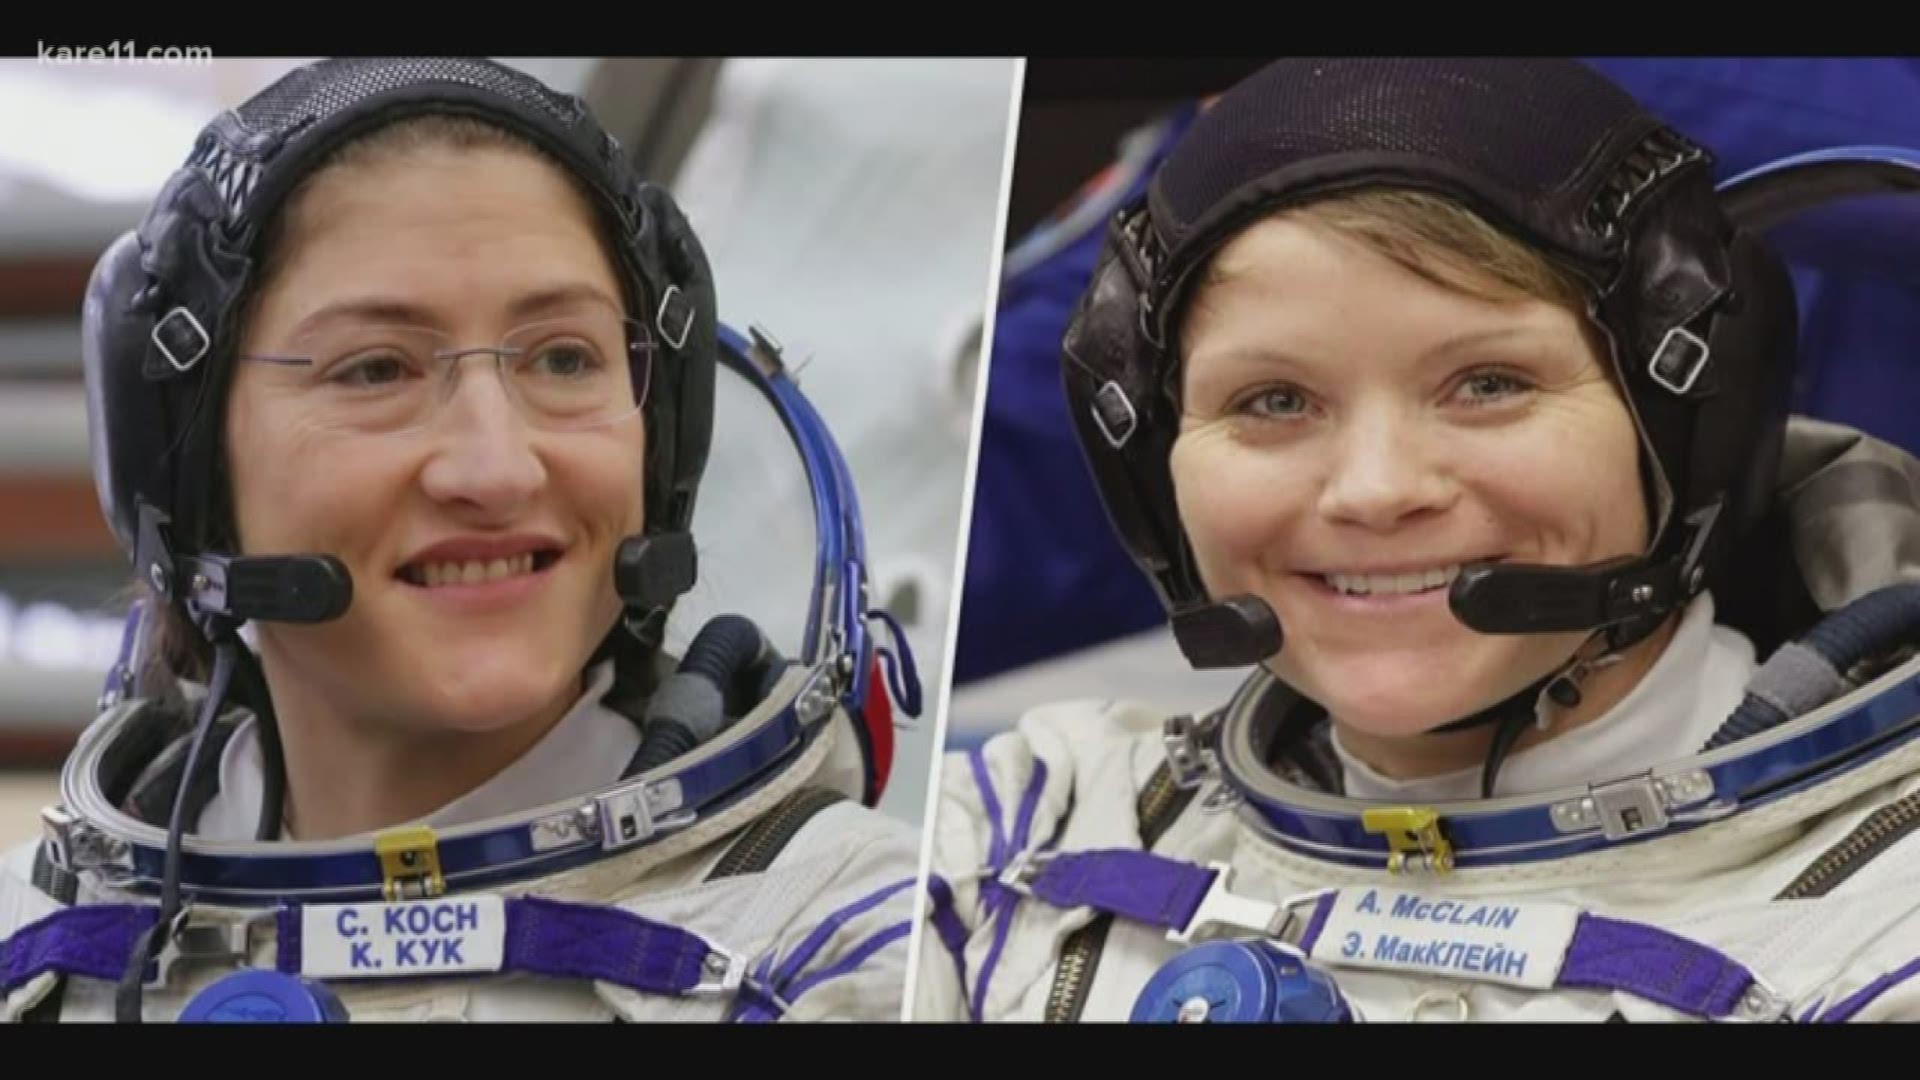 NASA astronauts Christina Koch and Jessica Meir made history Friday as the first all-female team to do a spacewalk at the International Space Station.